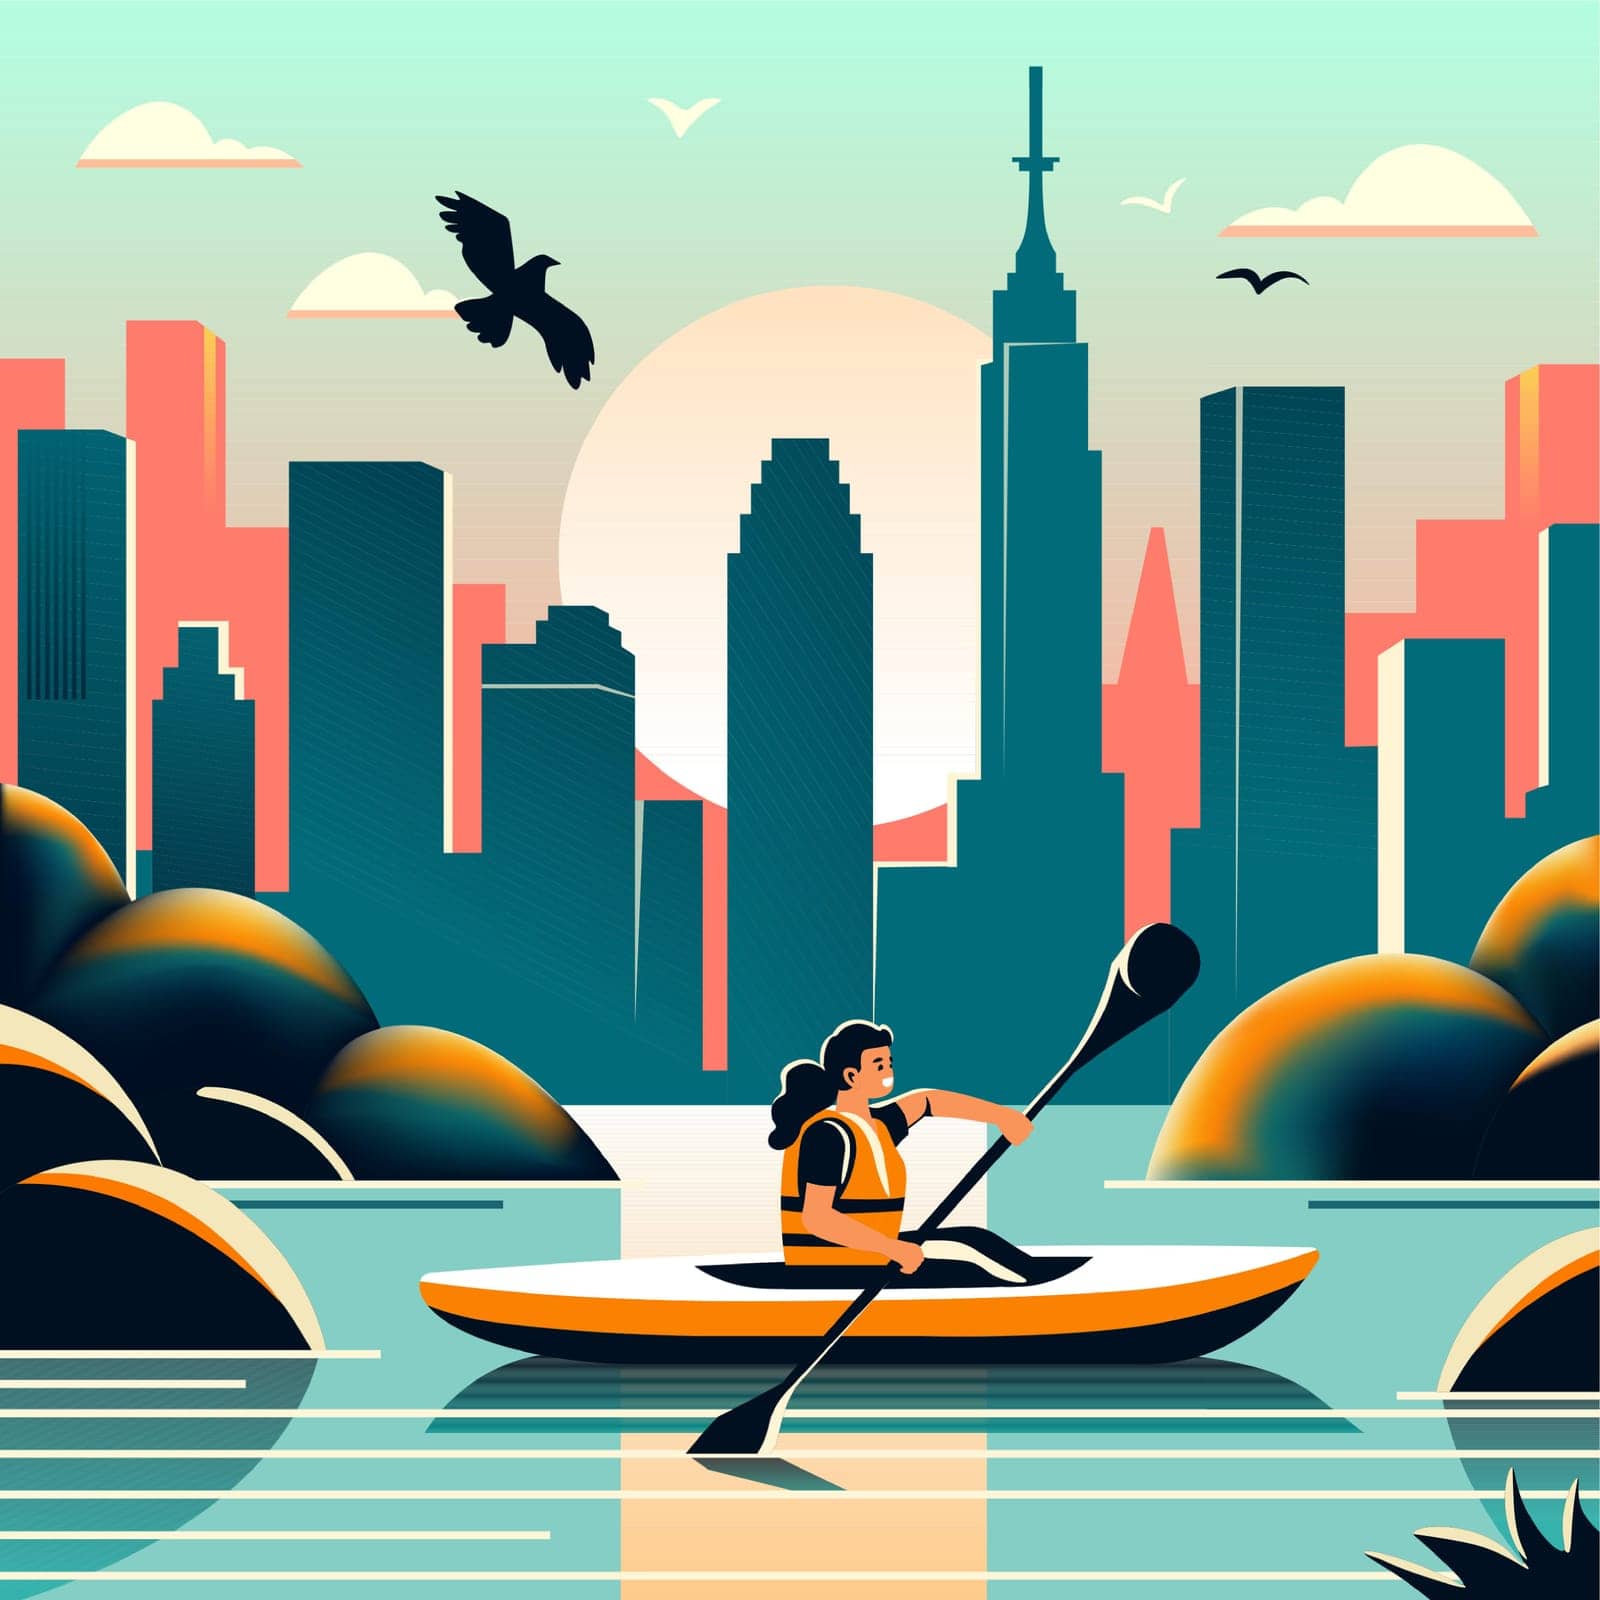 Solo kayaker enjoys cityscape at dawn, vector illustration, depicting a blend of outdoor activity and urban environment.